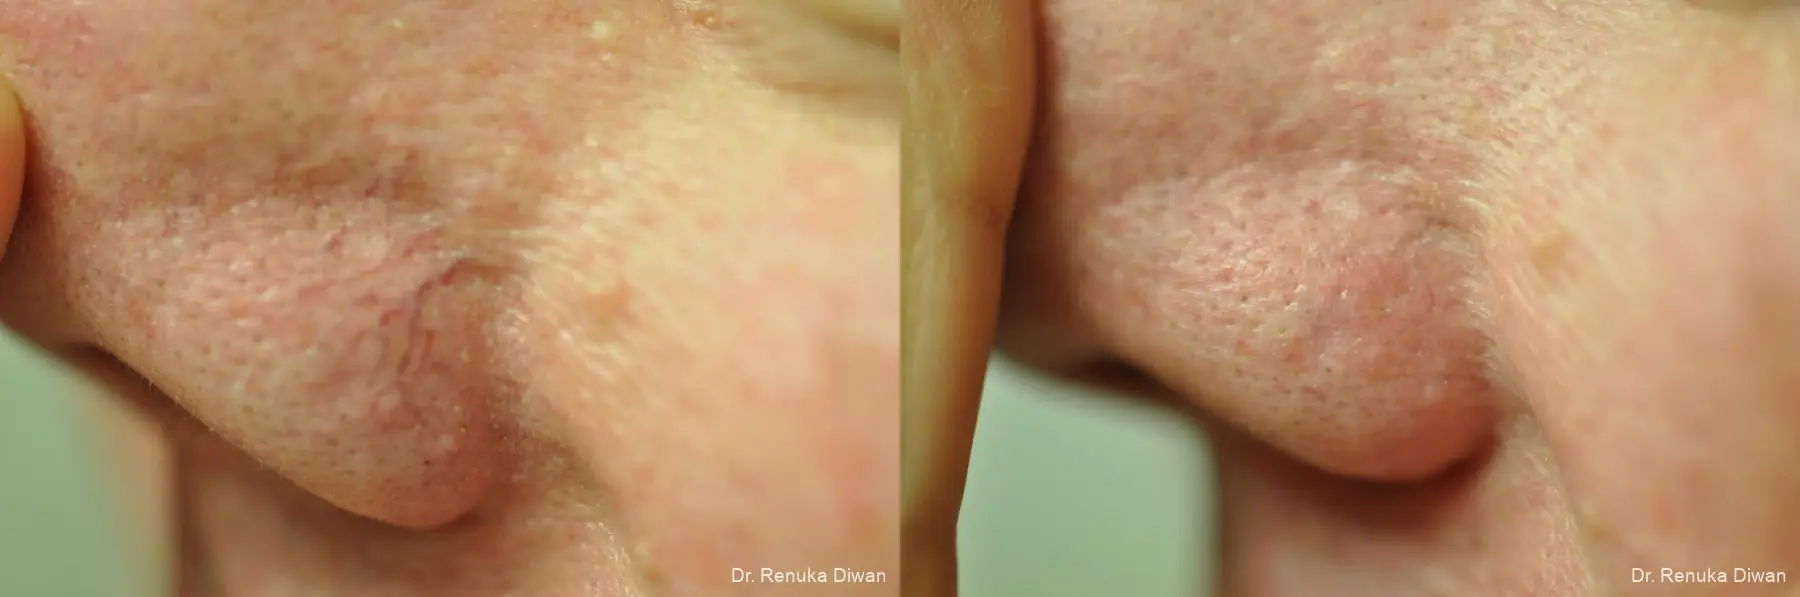 Laser For Veins And Redness: Patient 22 - Before and After 1